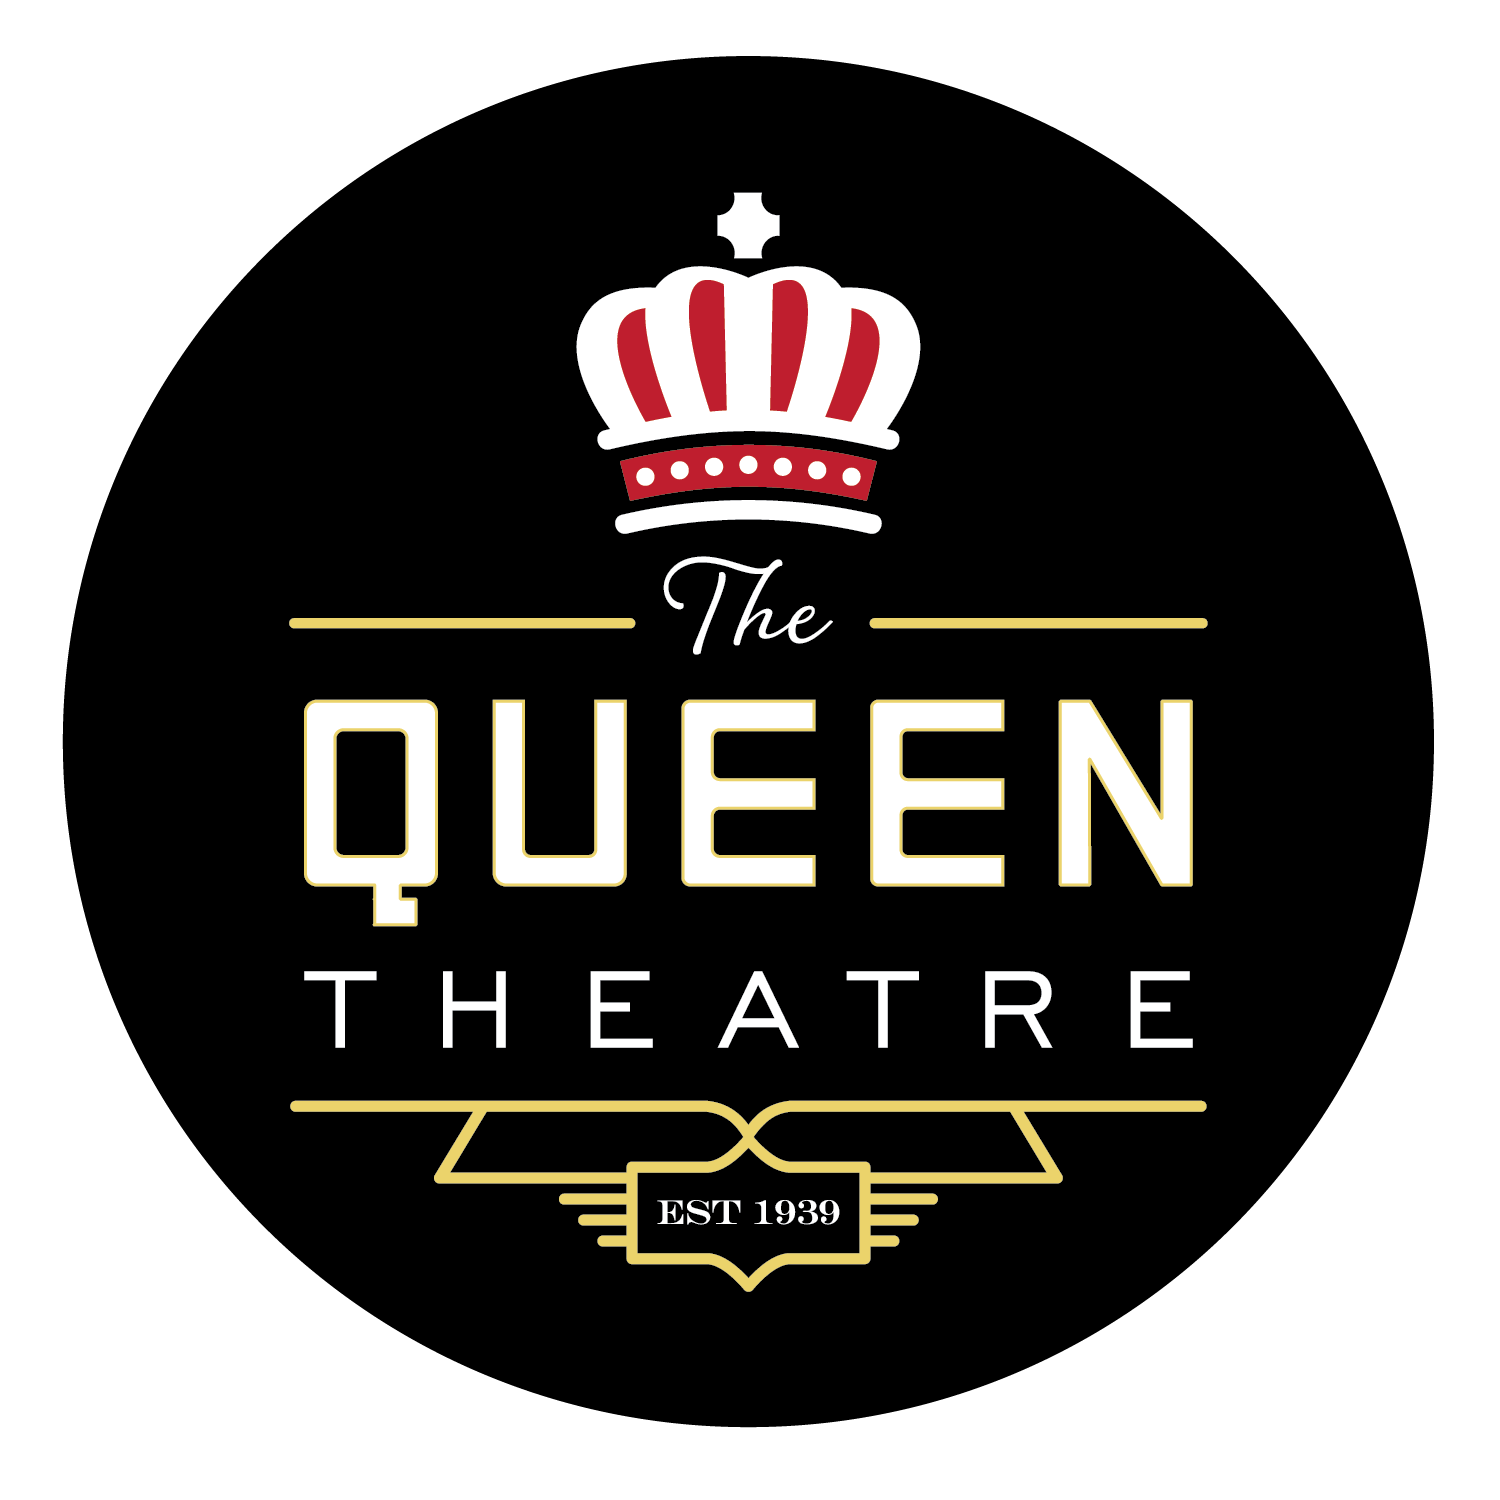 The Queen Theater: Family Matinee